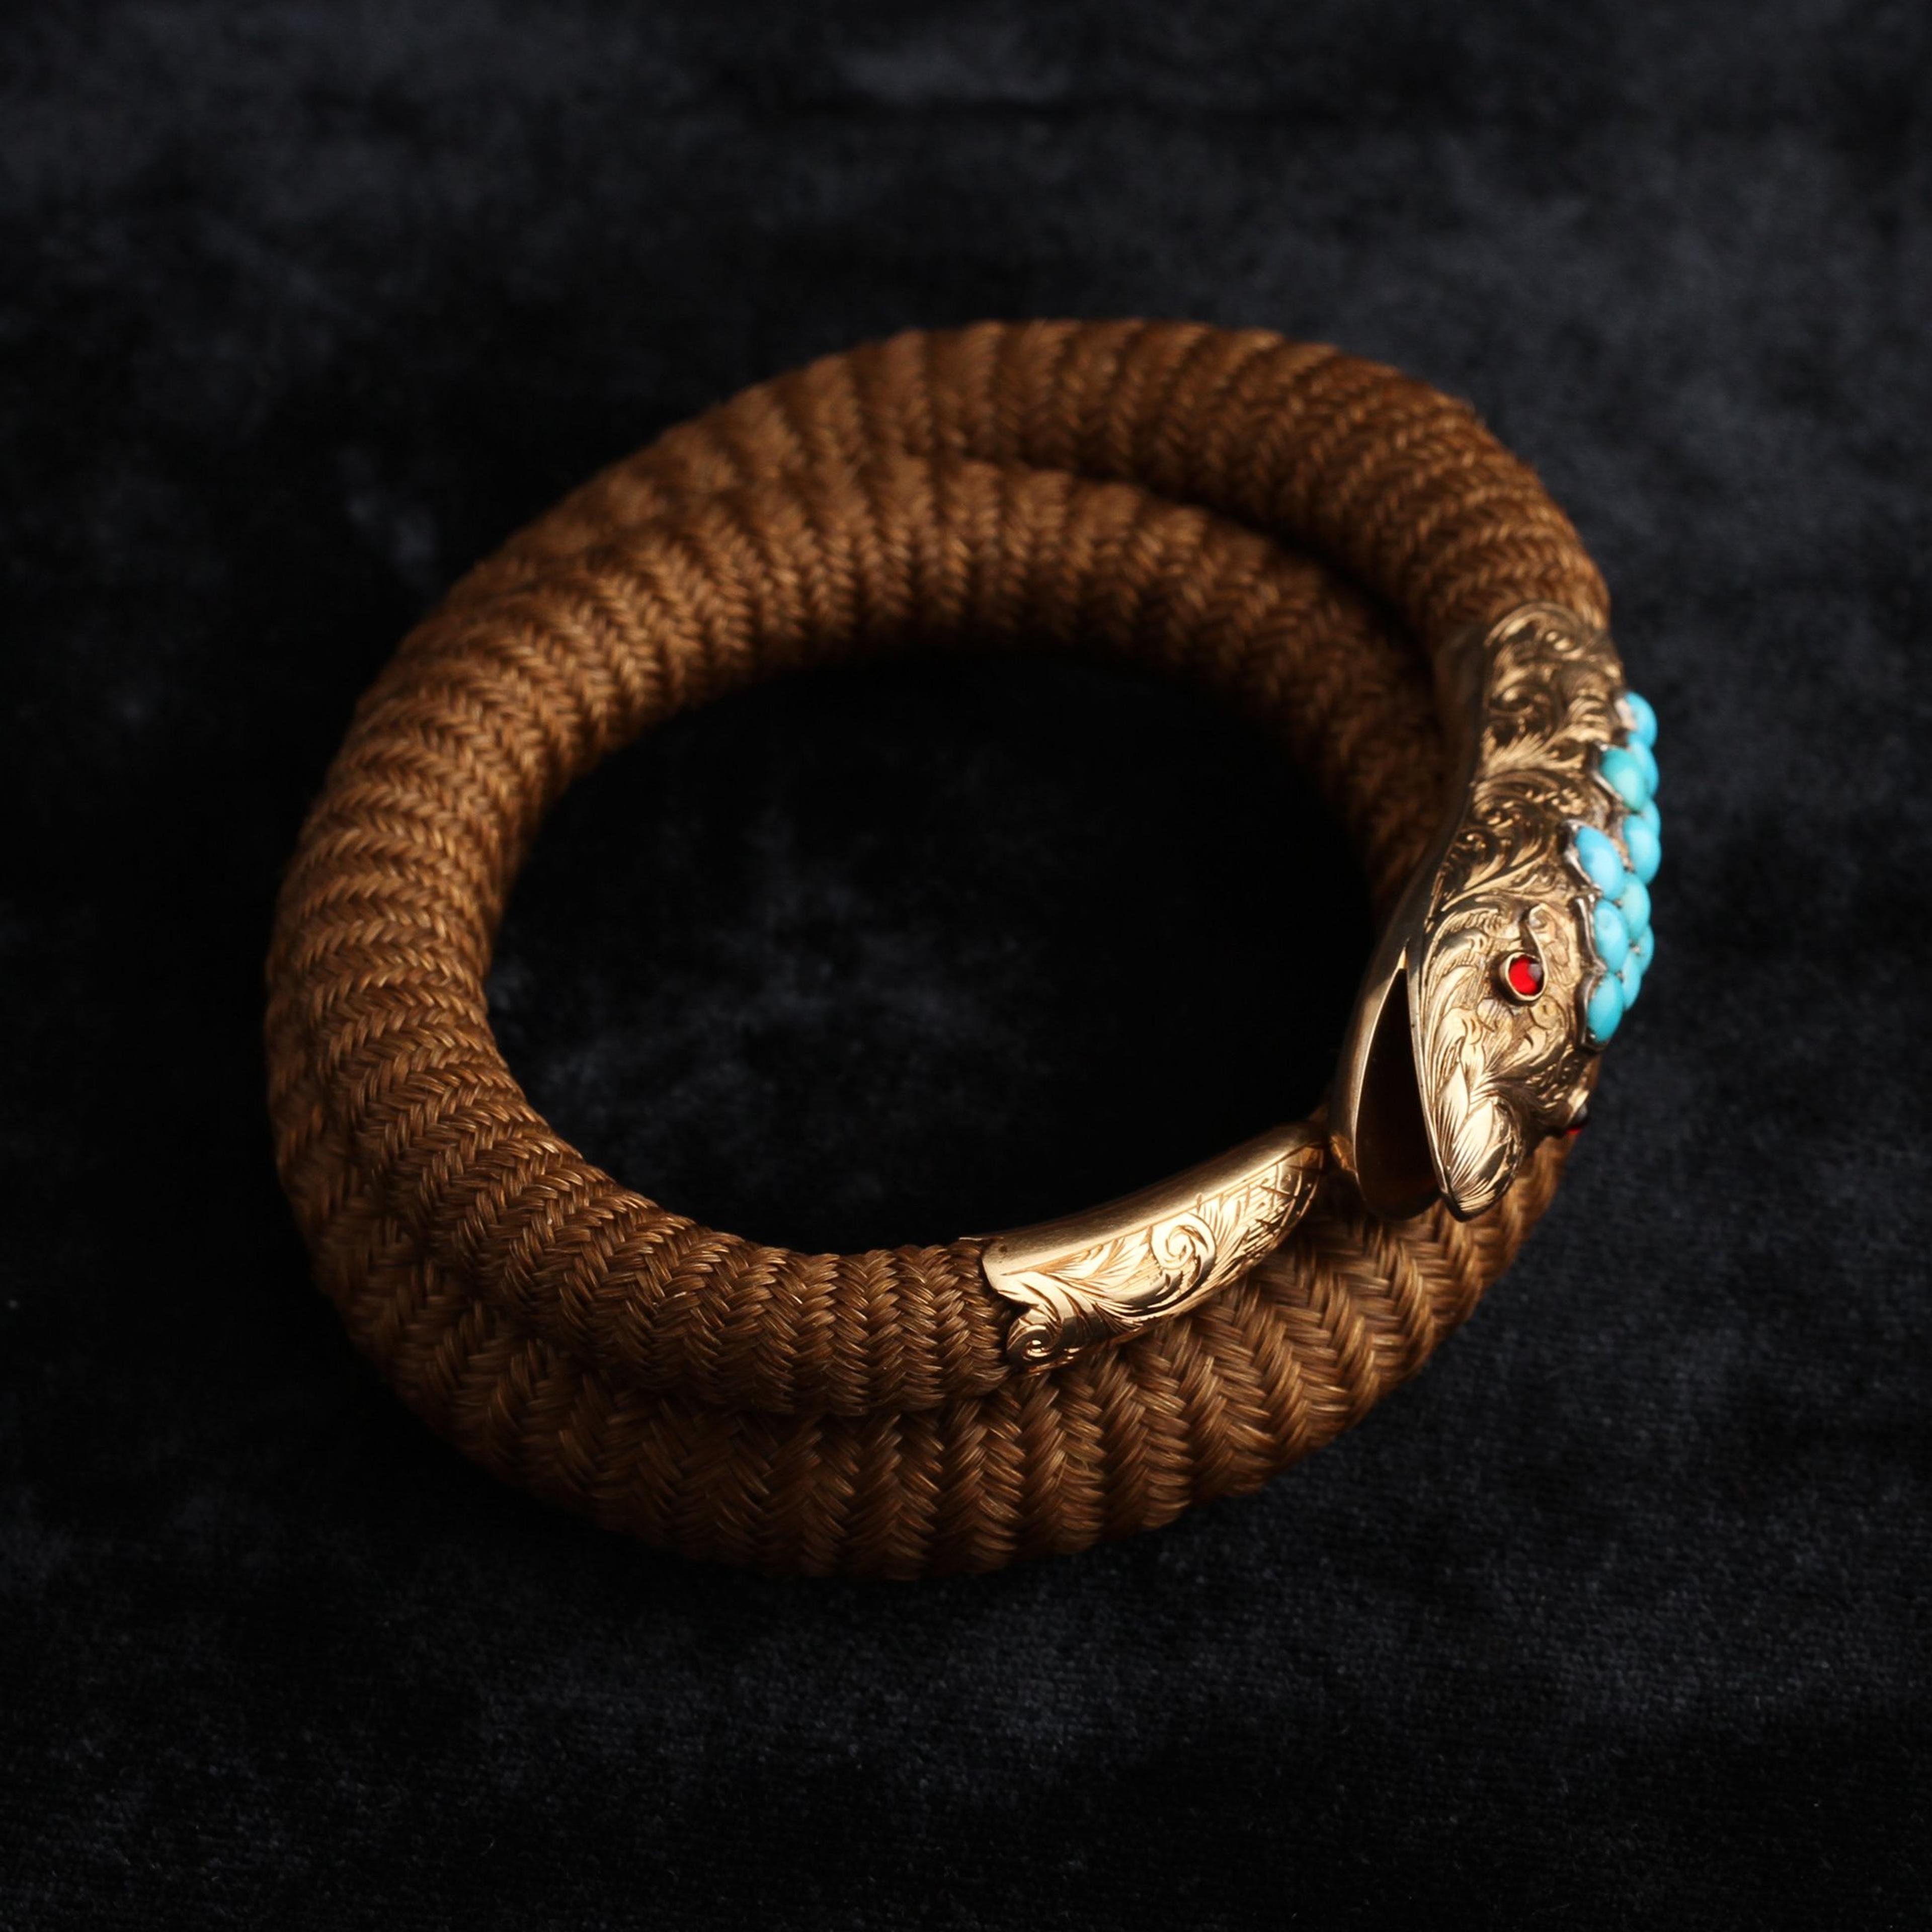 Detail of Victorian Coiled Serpent Hair Bangle with Garnets and Turquoise